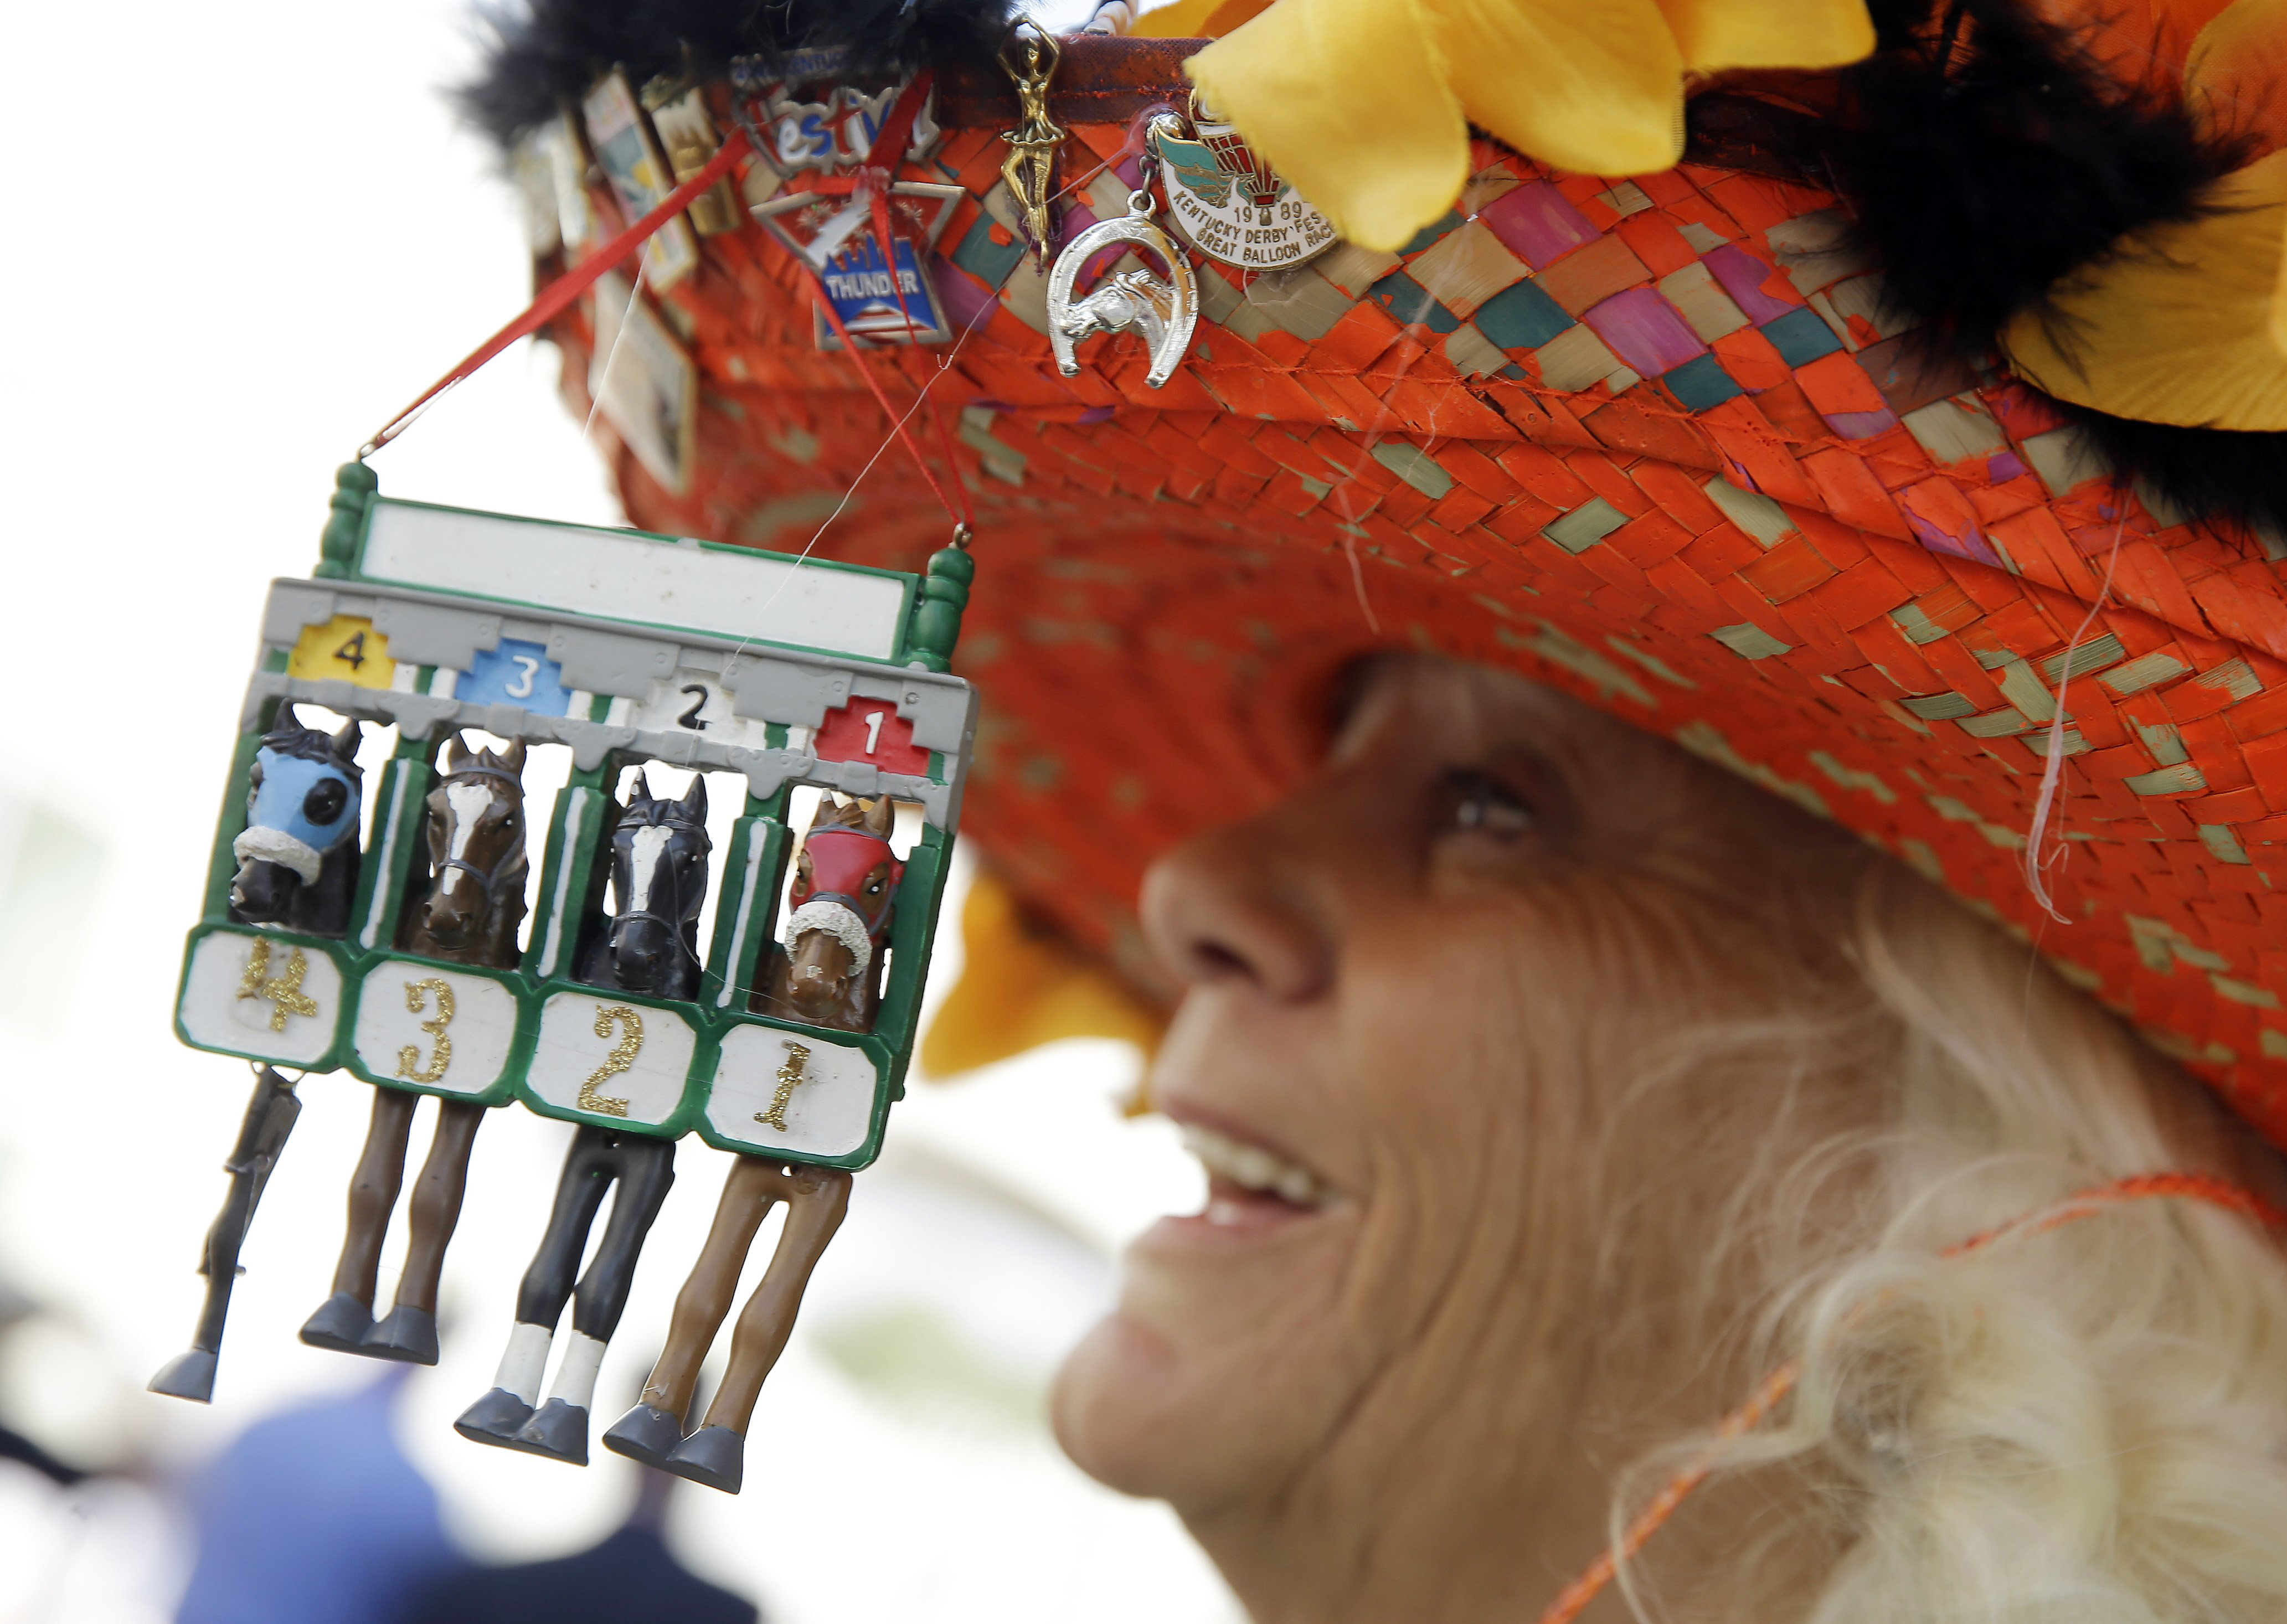 Woman with a hat during the 141st running of the Kentucky Oaks horse race at Churchill Downs on May 1, 2015, in Louisville, Ky.